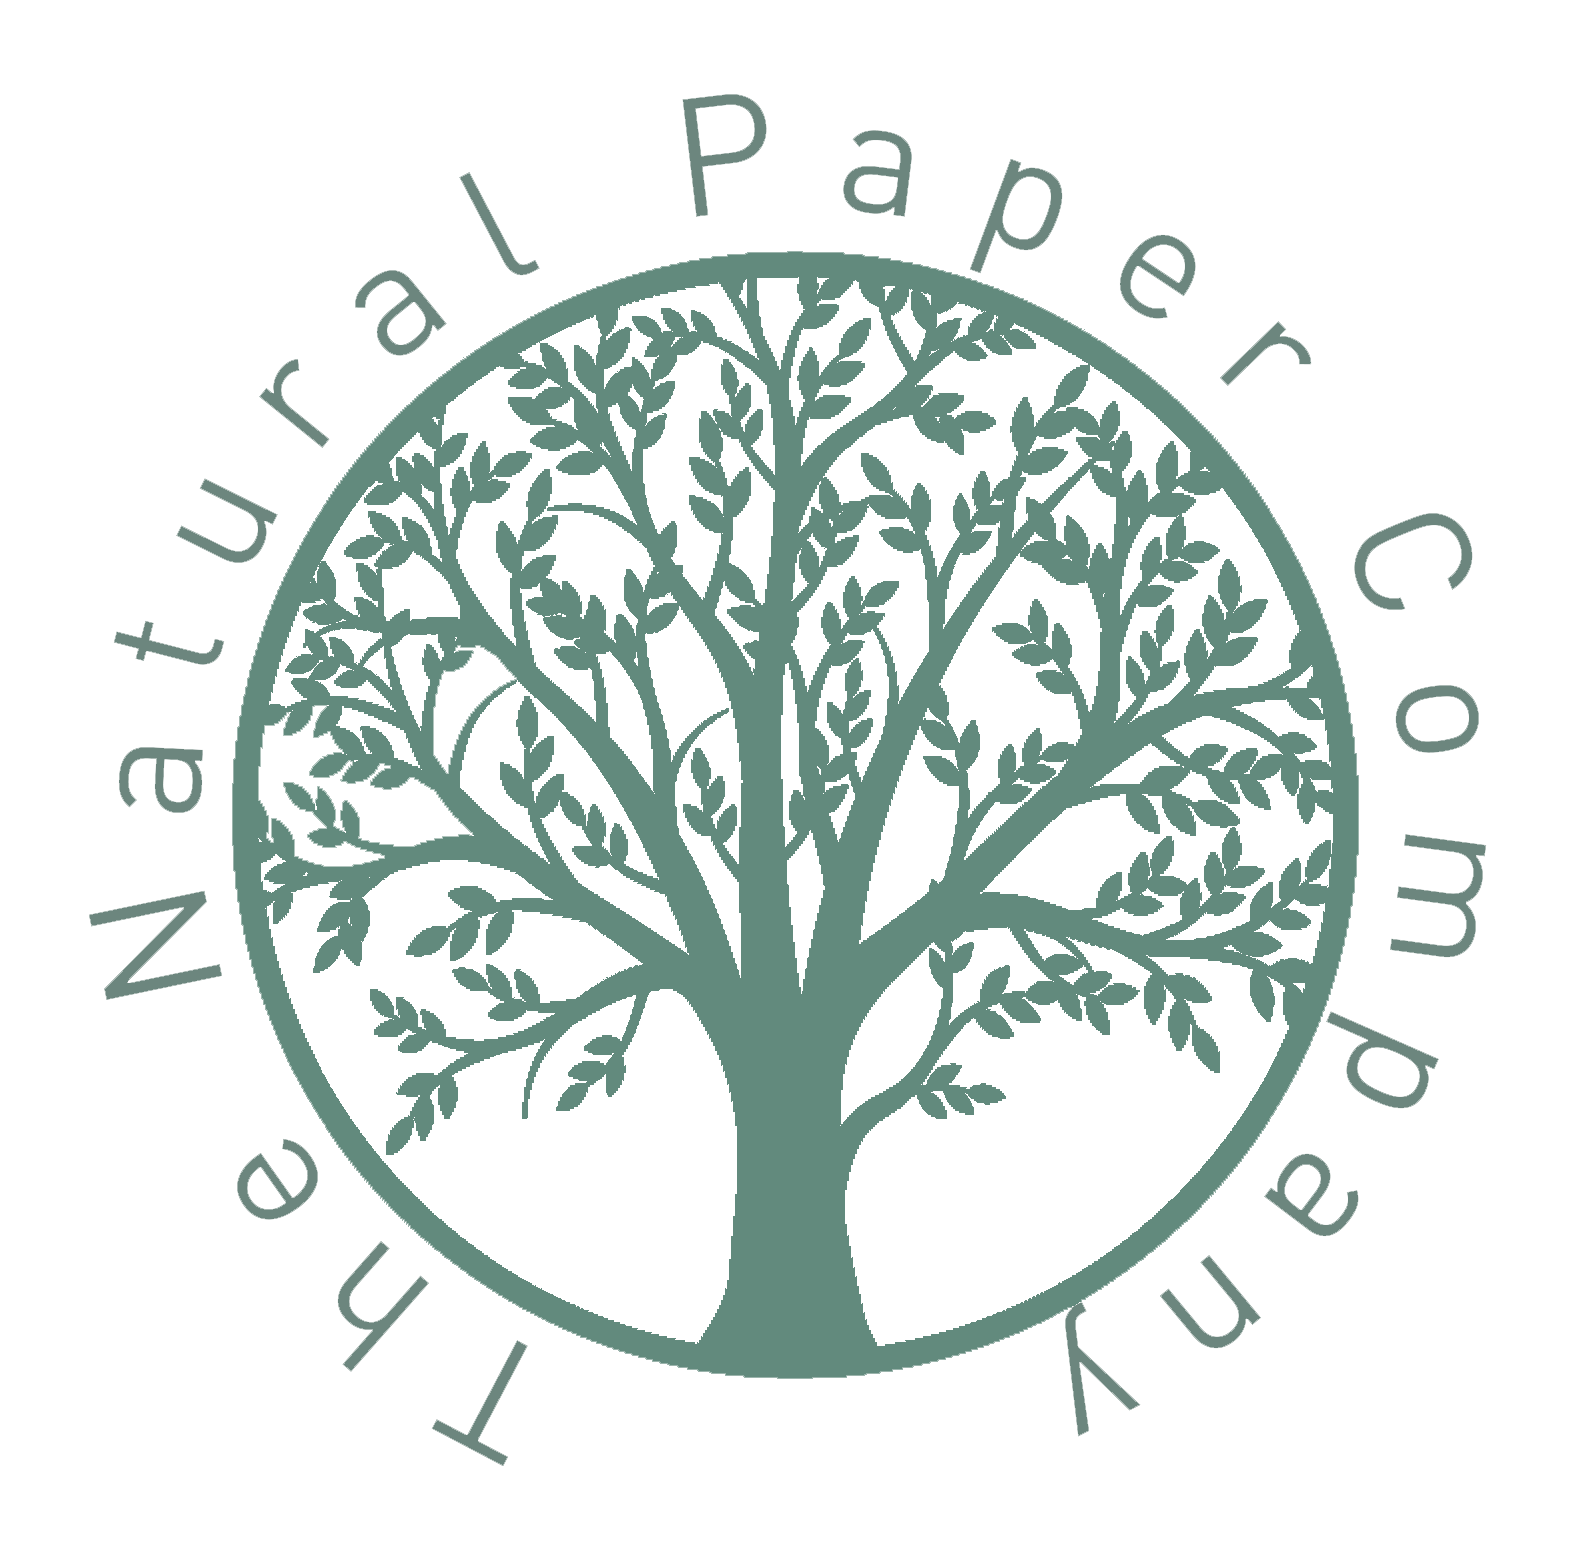 The Natural Paper Company.  Handmade paper, Silk Ribbons and Wax Seals.  Beautiful natural stationery products that are kind to the environments.  